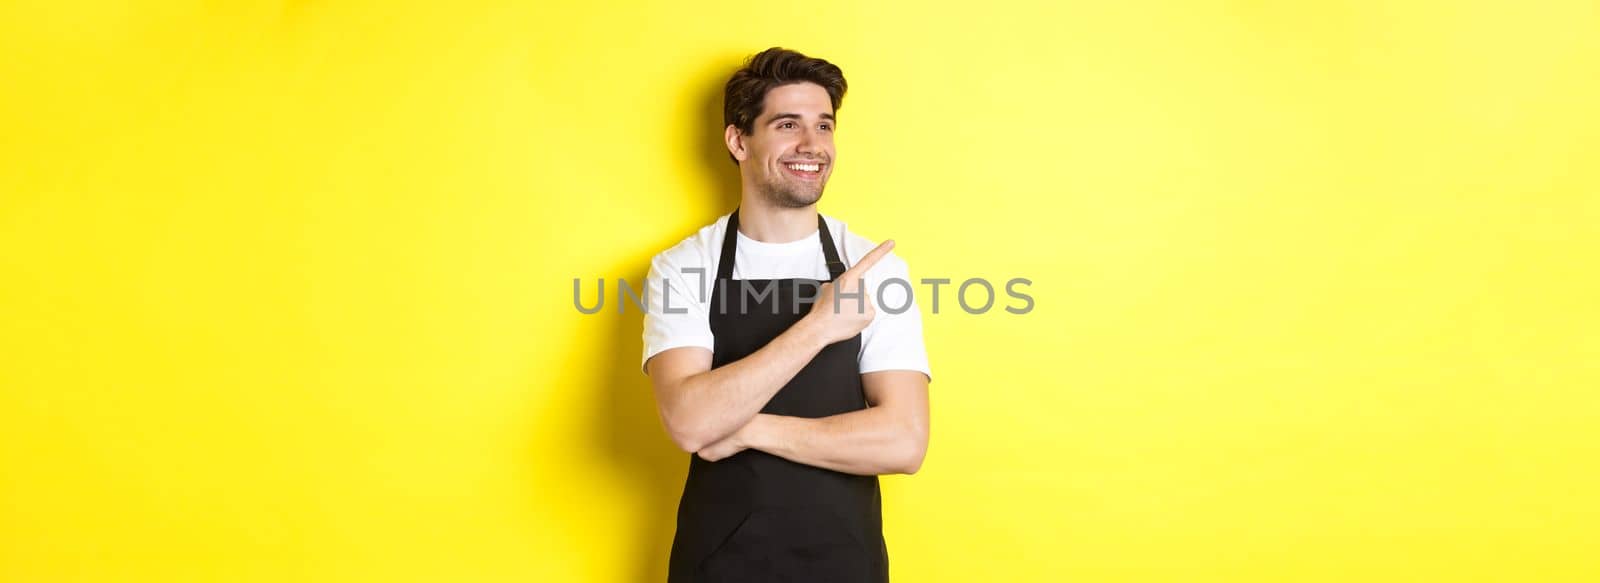 Handsome barista pointing and looking left at promo, wearing black apron, standing against yellow background.